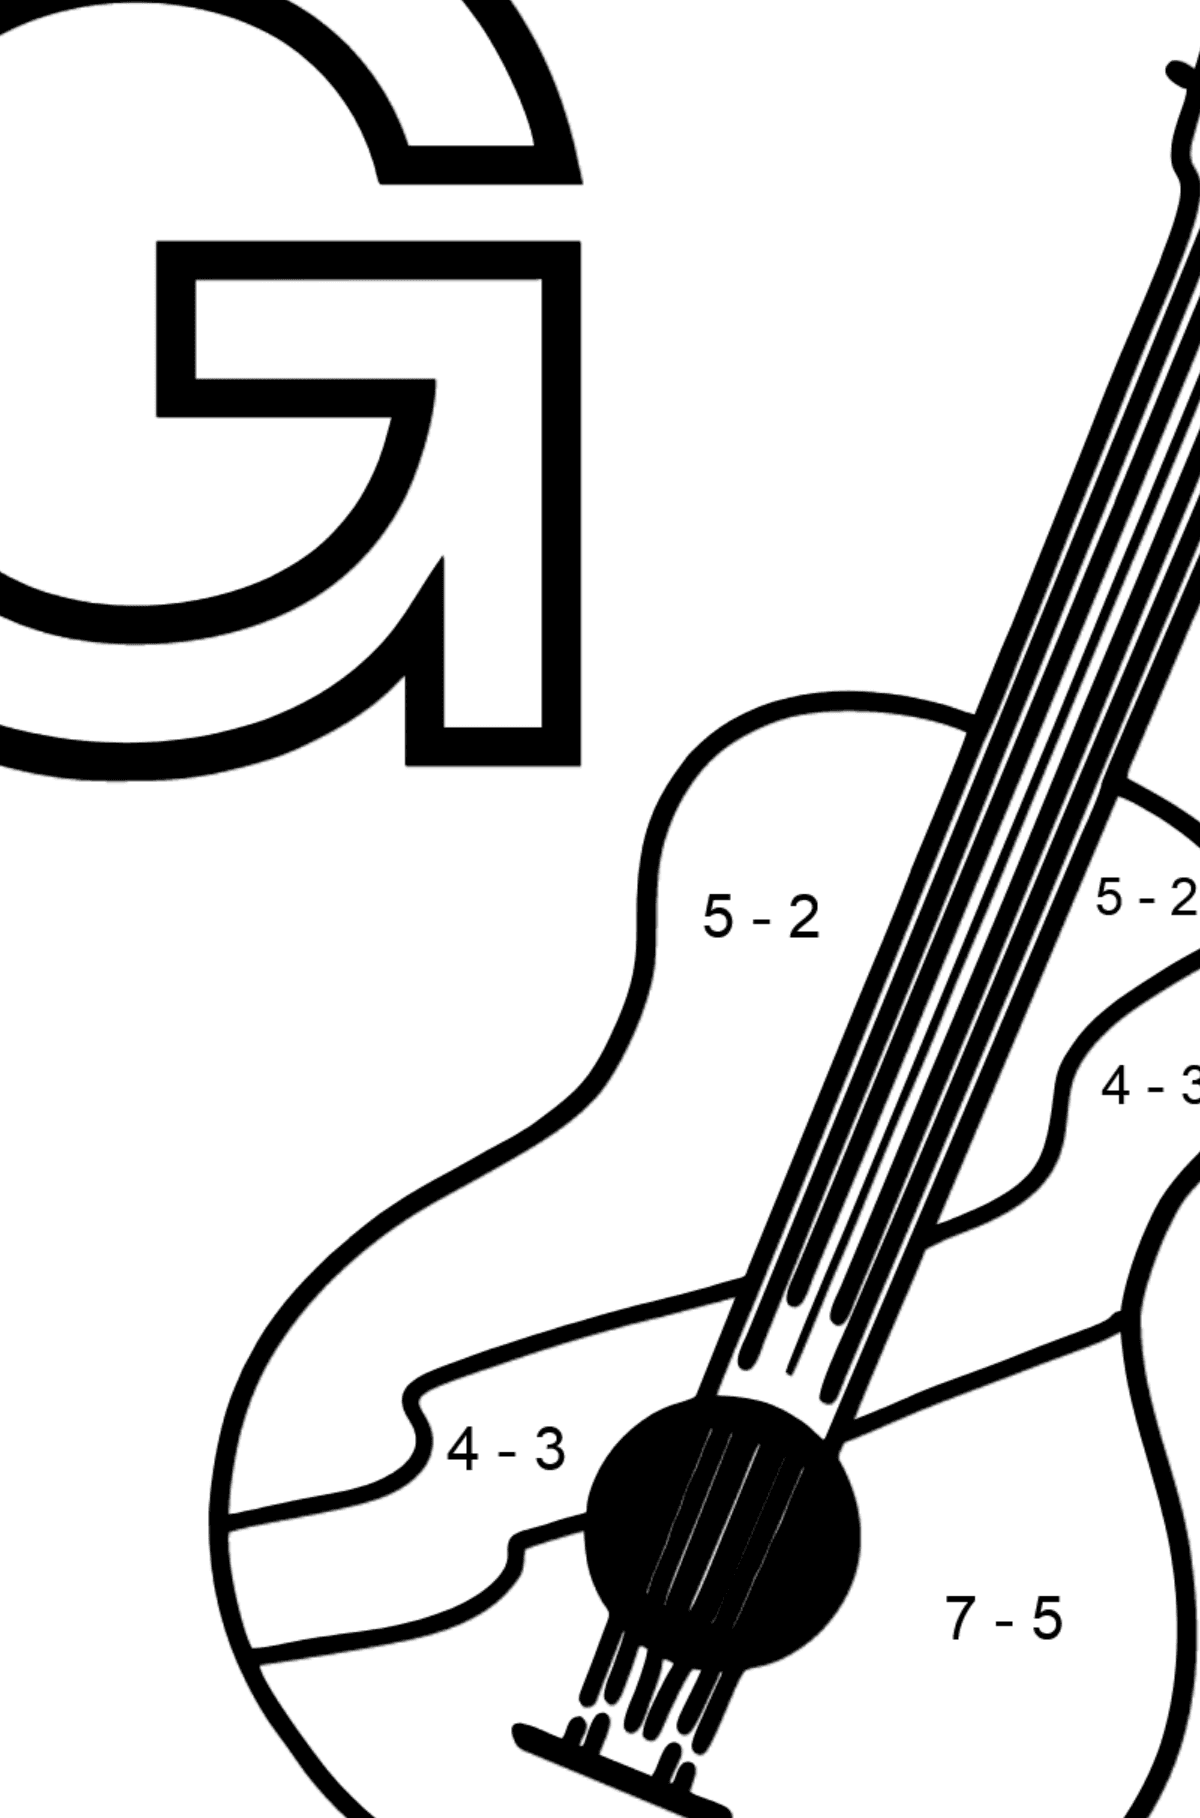 Spanish Letter G coloring pages - GUITARRA - Math Coloring - Subtraction for Kids